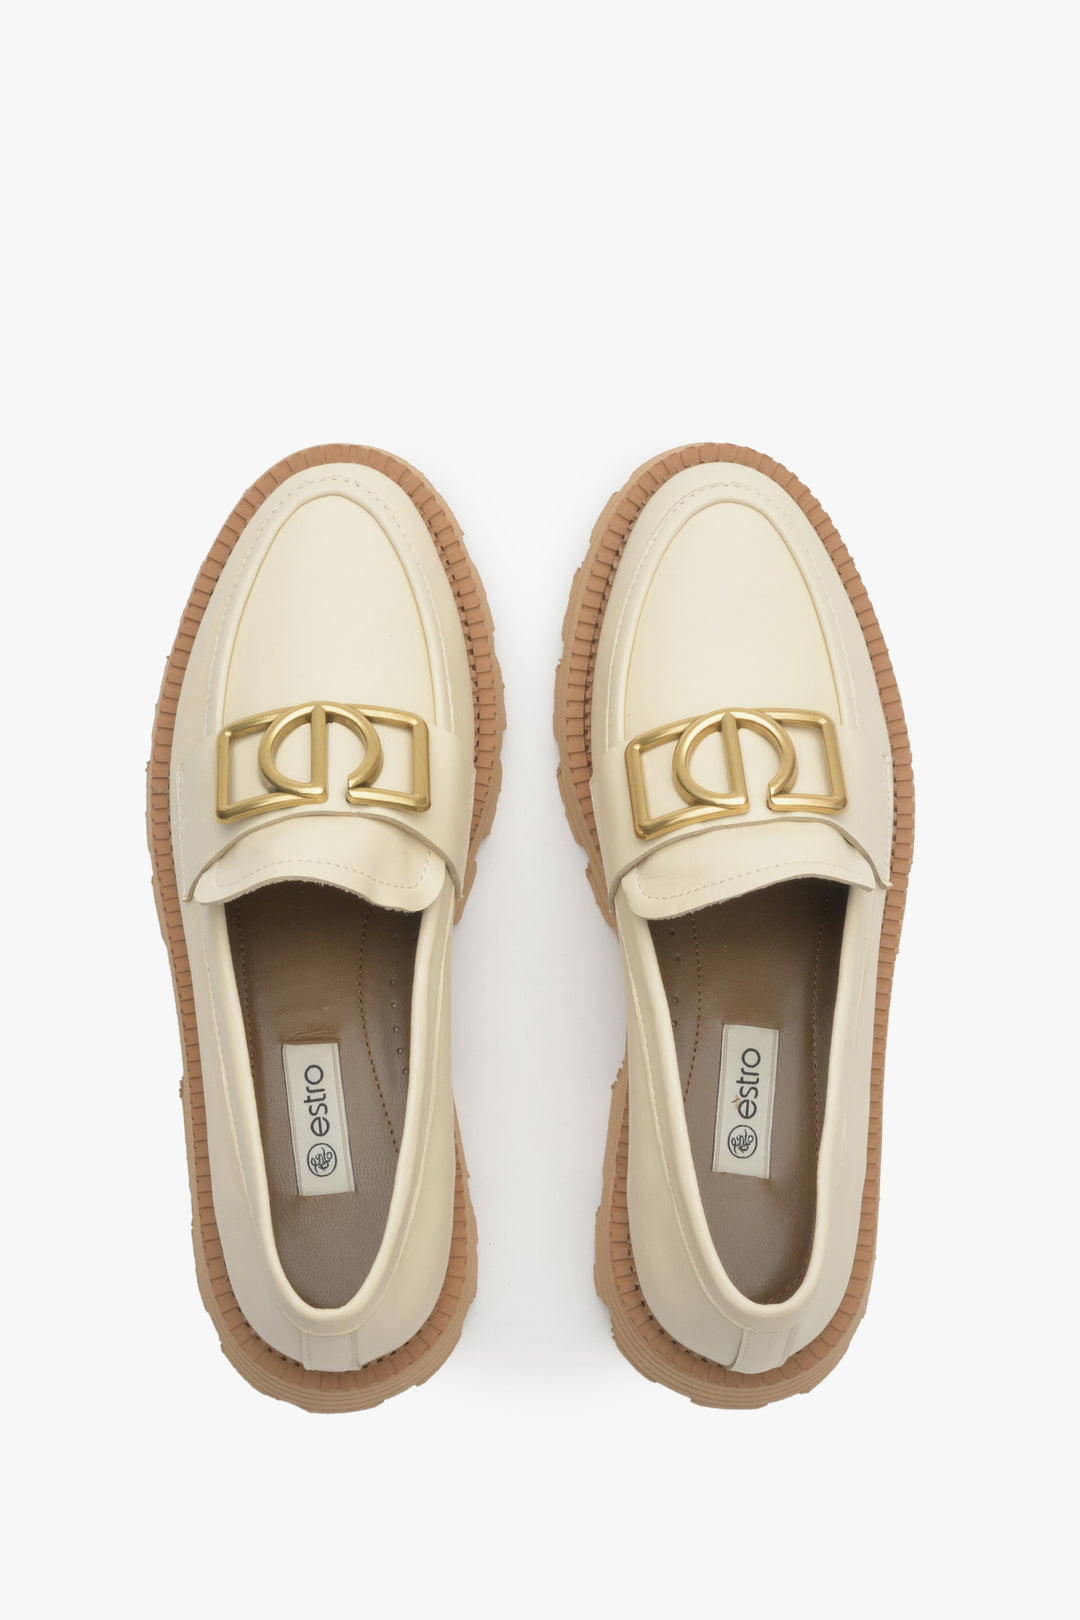 Light beige women's loafers made of natural leather with gold chain - presentation of the footwear from above.